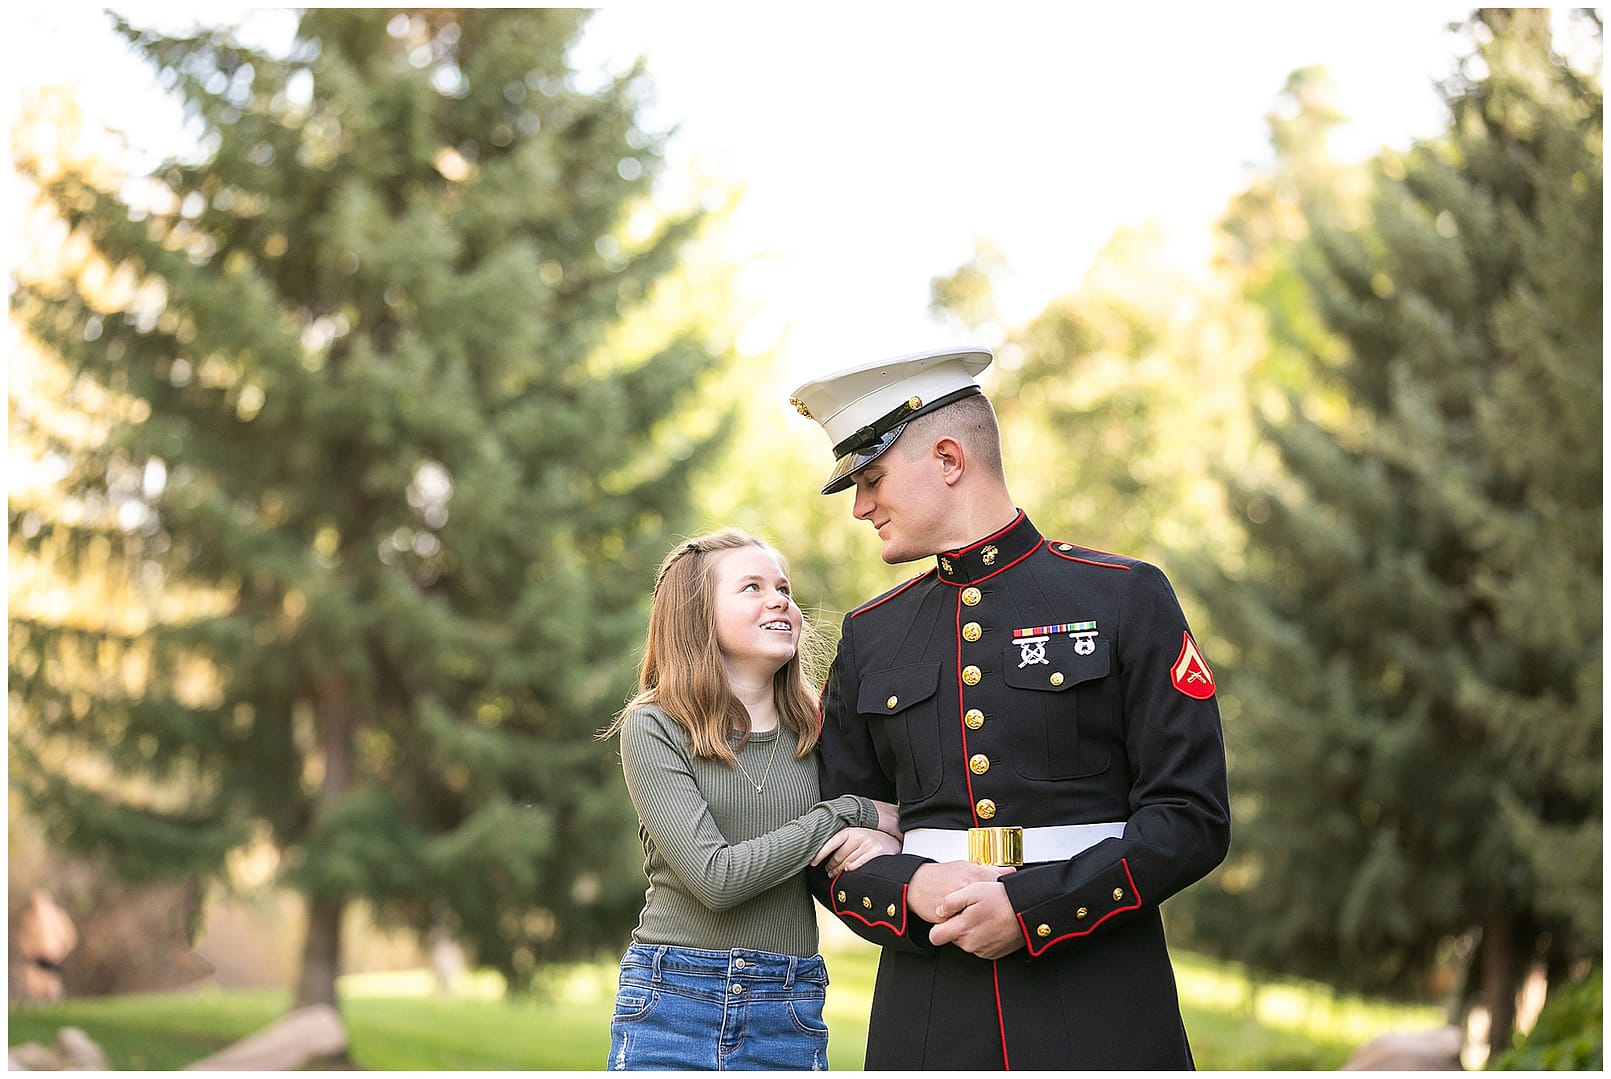 Young man and youngest sibling share a special moment. Photo by Tiffany Hix Photography.